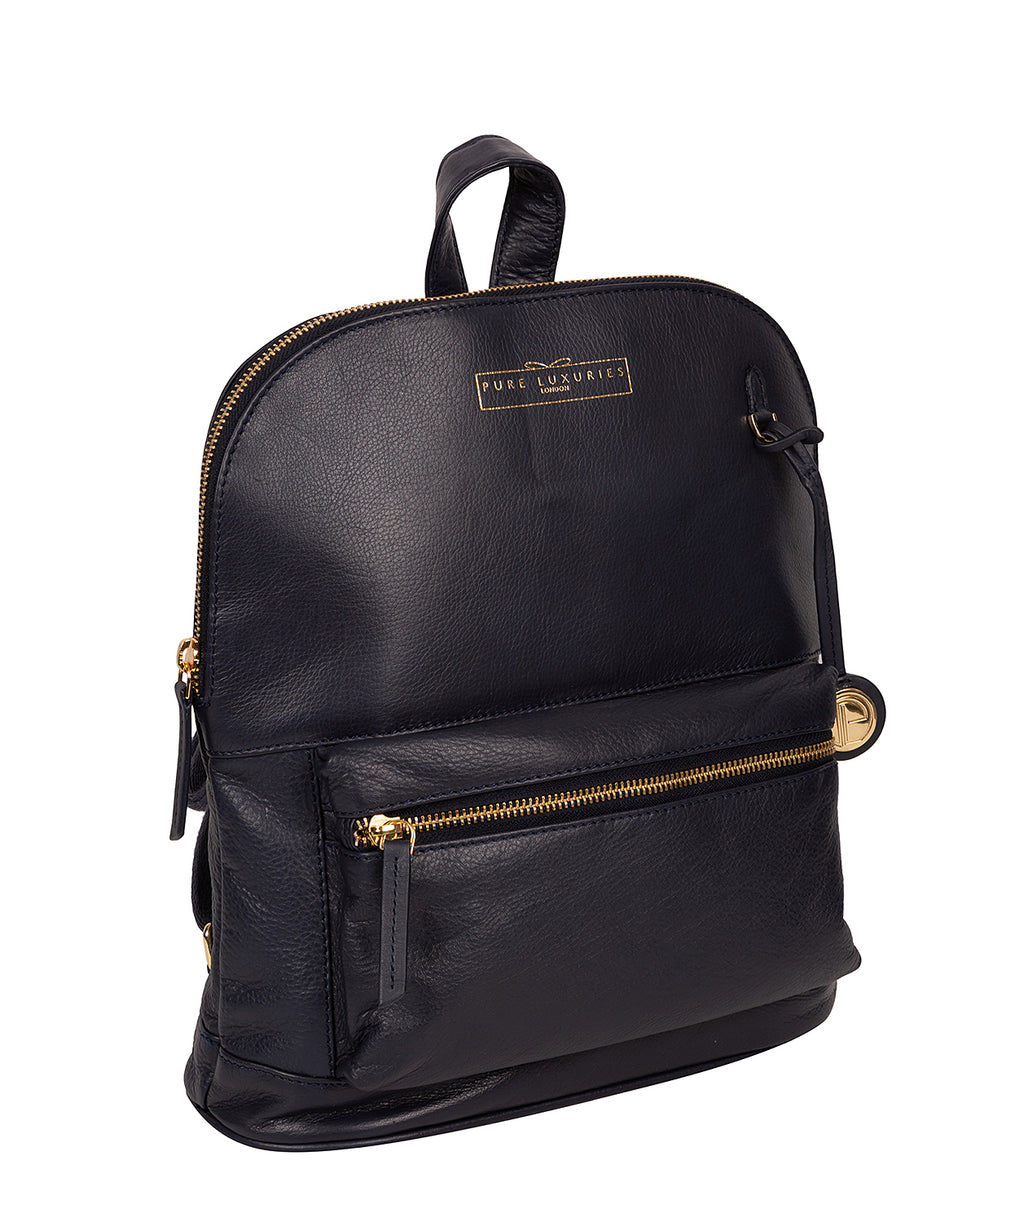 Blue Leather Backpack 'Kinsely' by Pure Luxuries – Pure Luxuries London